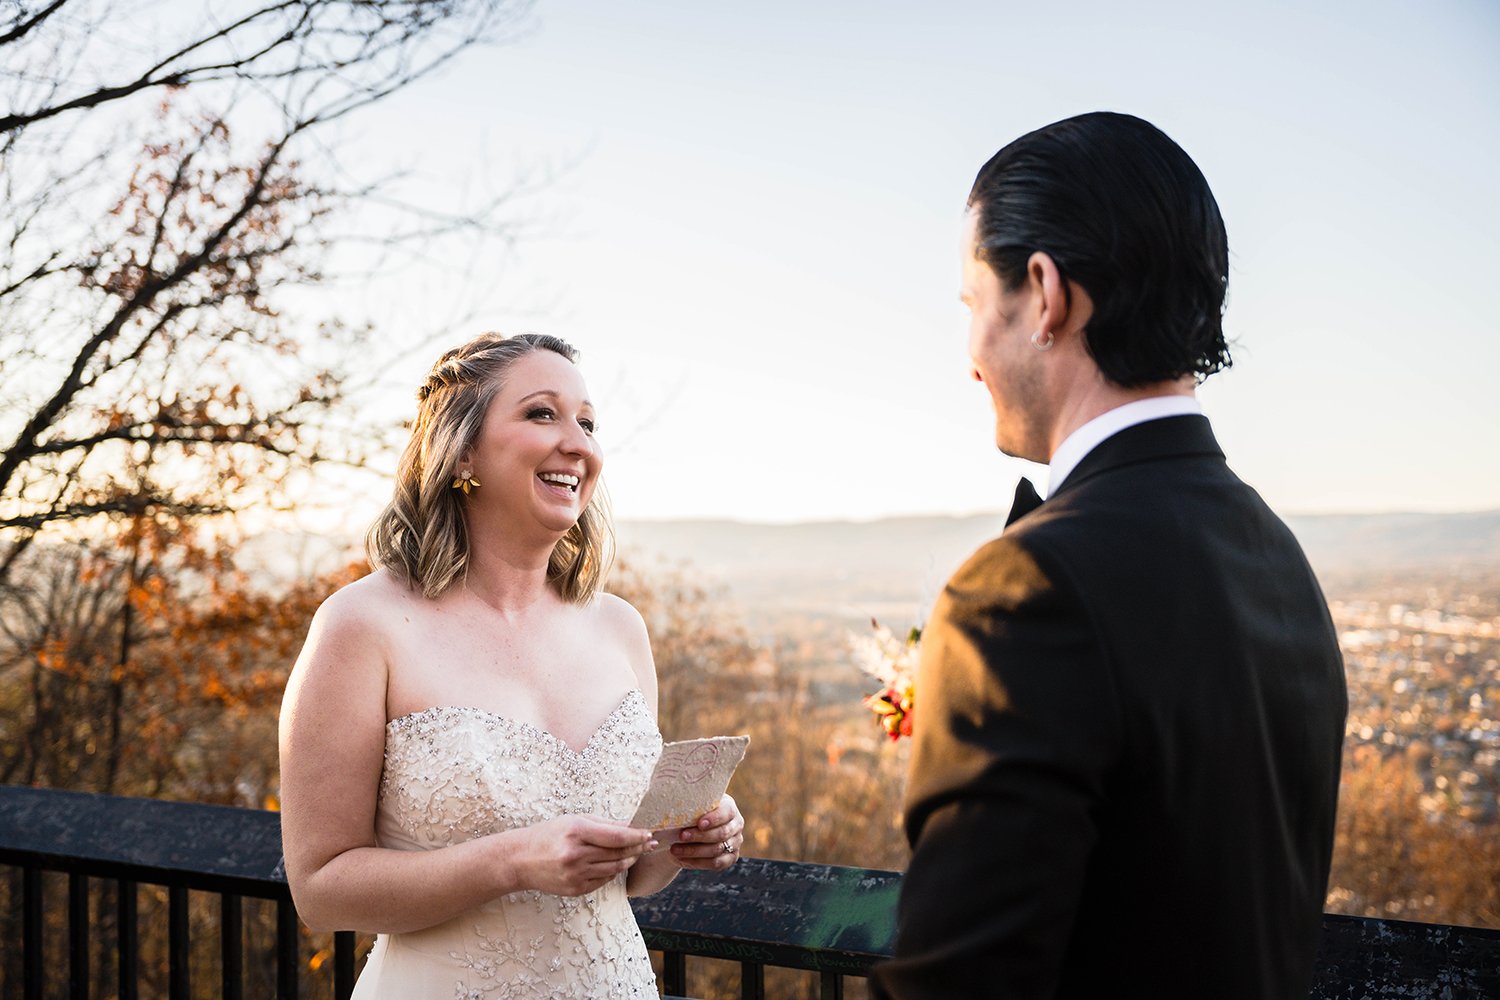 A couple on their elopement day exchange their vows at the Rockledge Overlook in Roanoke, Virginia.